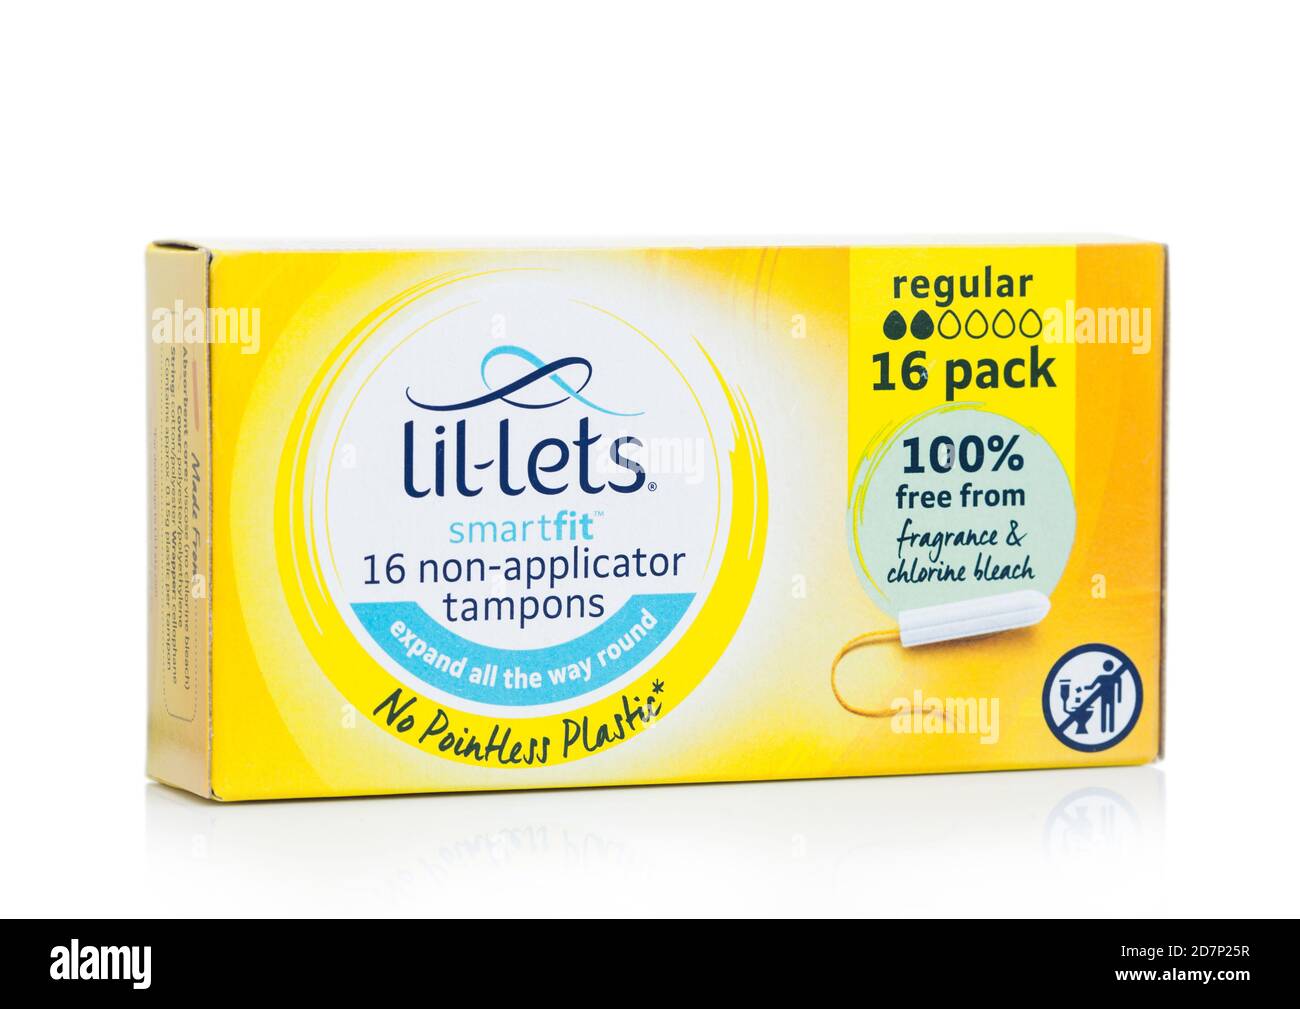 LONDON, UK - OCTOBER 14, 2020: Box of Lil-lets non-applicator tampons on  white background Stock Photo - Alamy